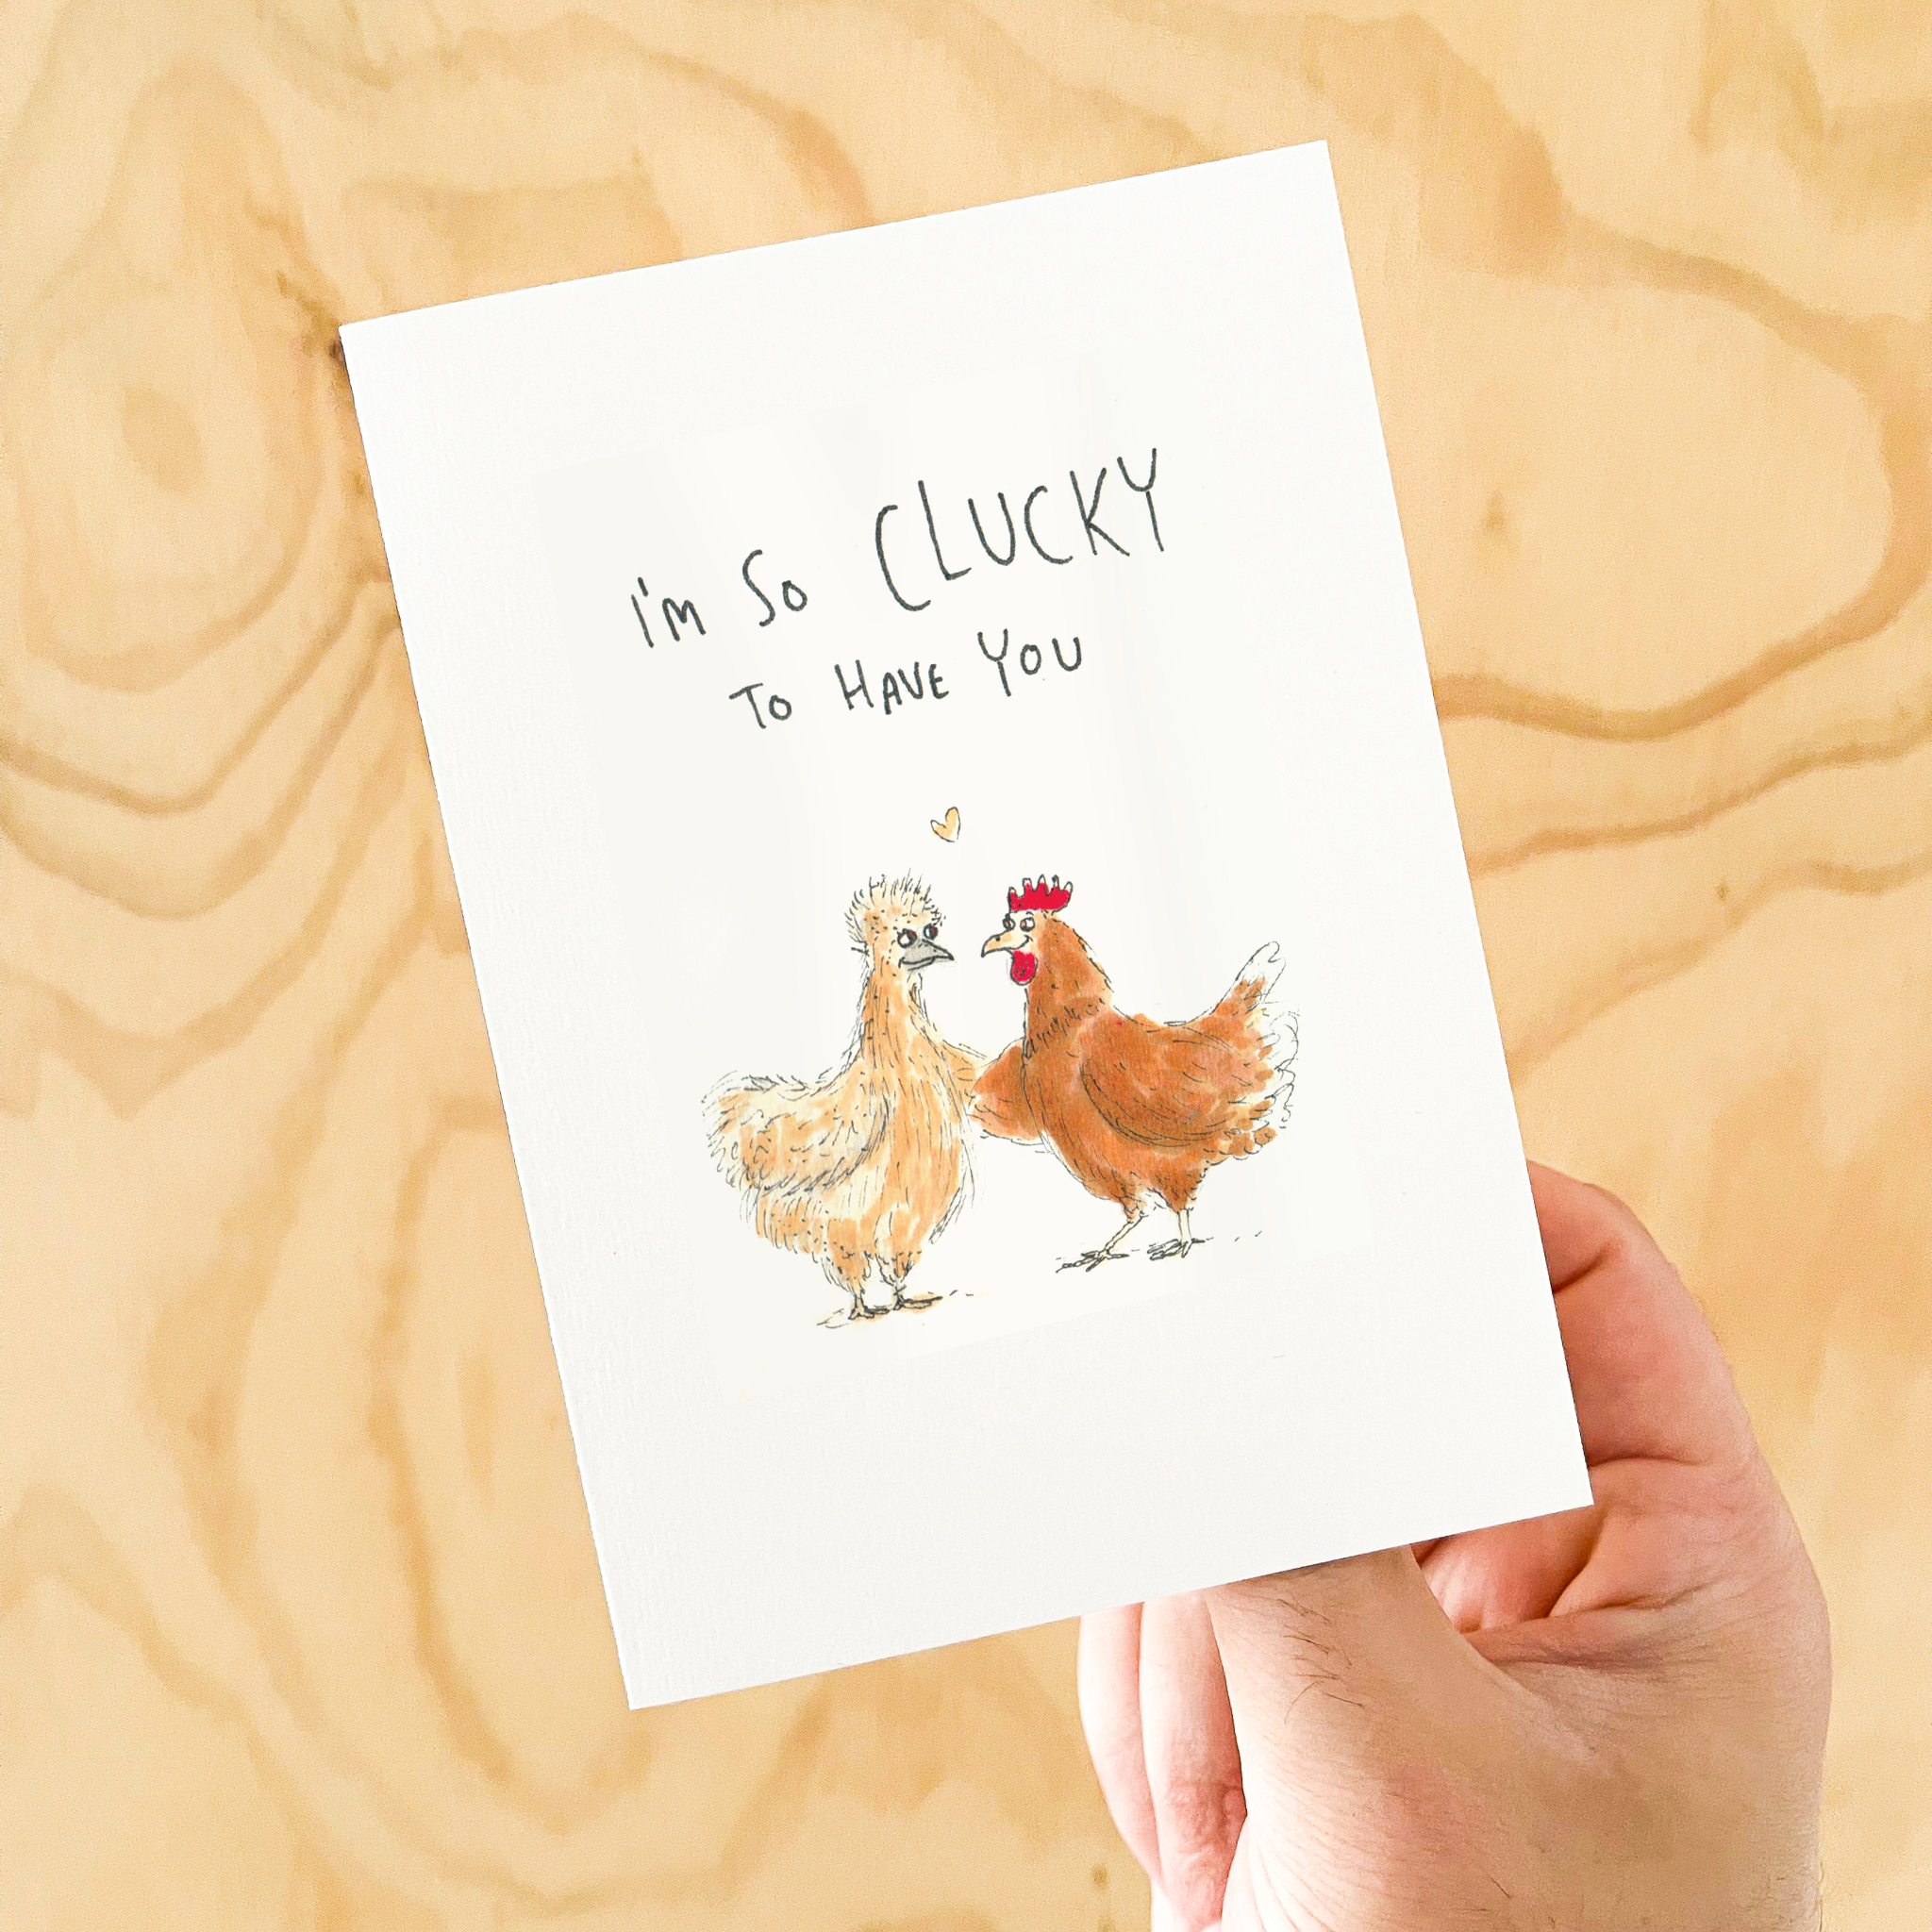 I'm so Clucky To Have You